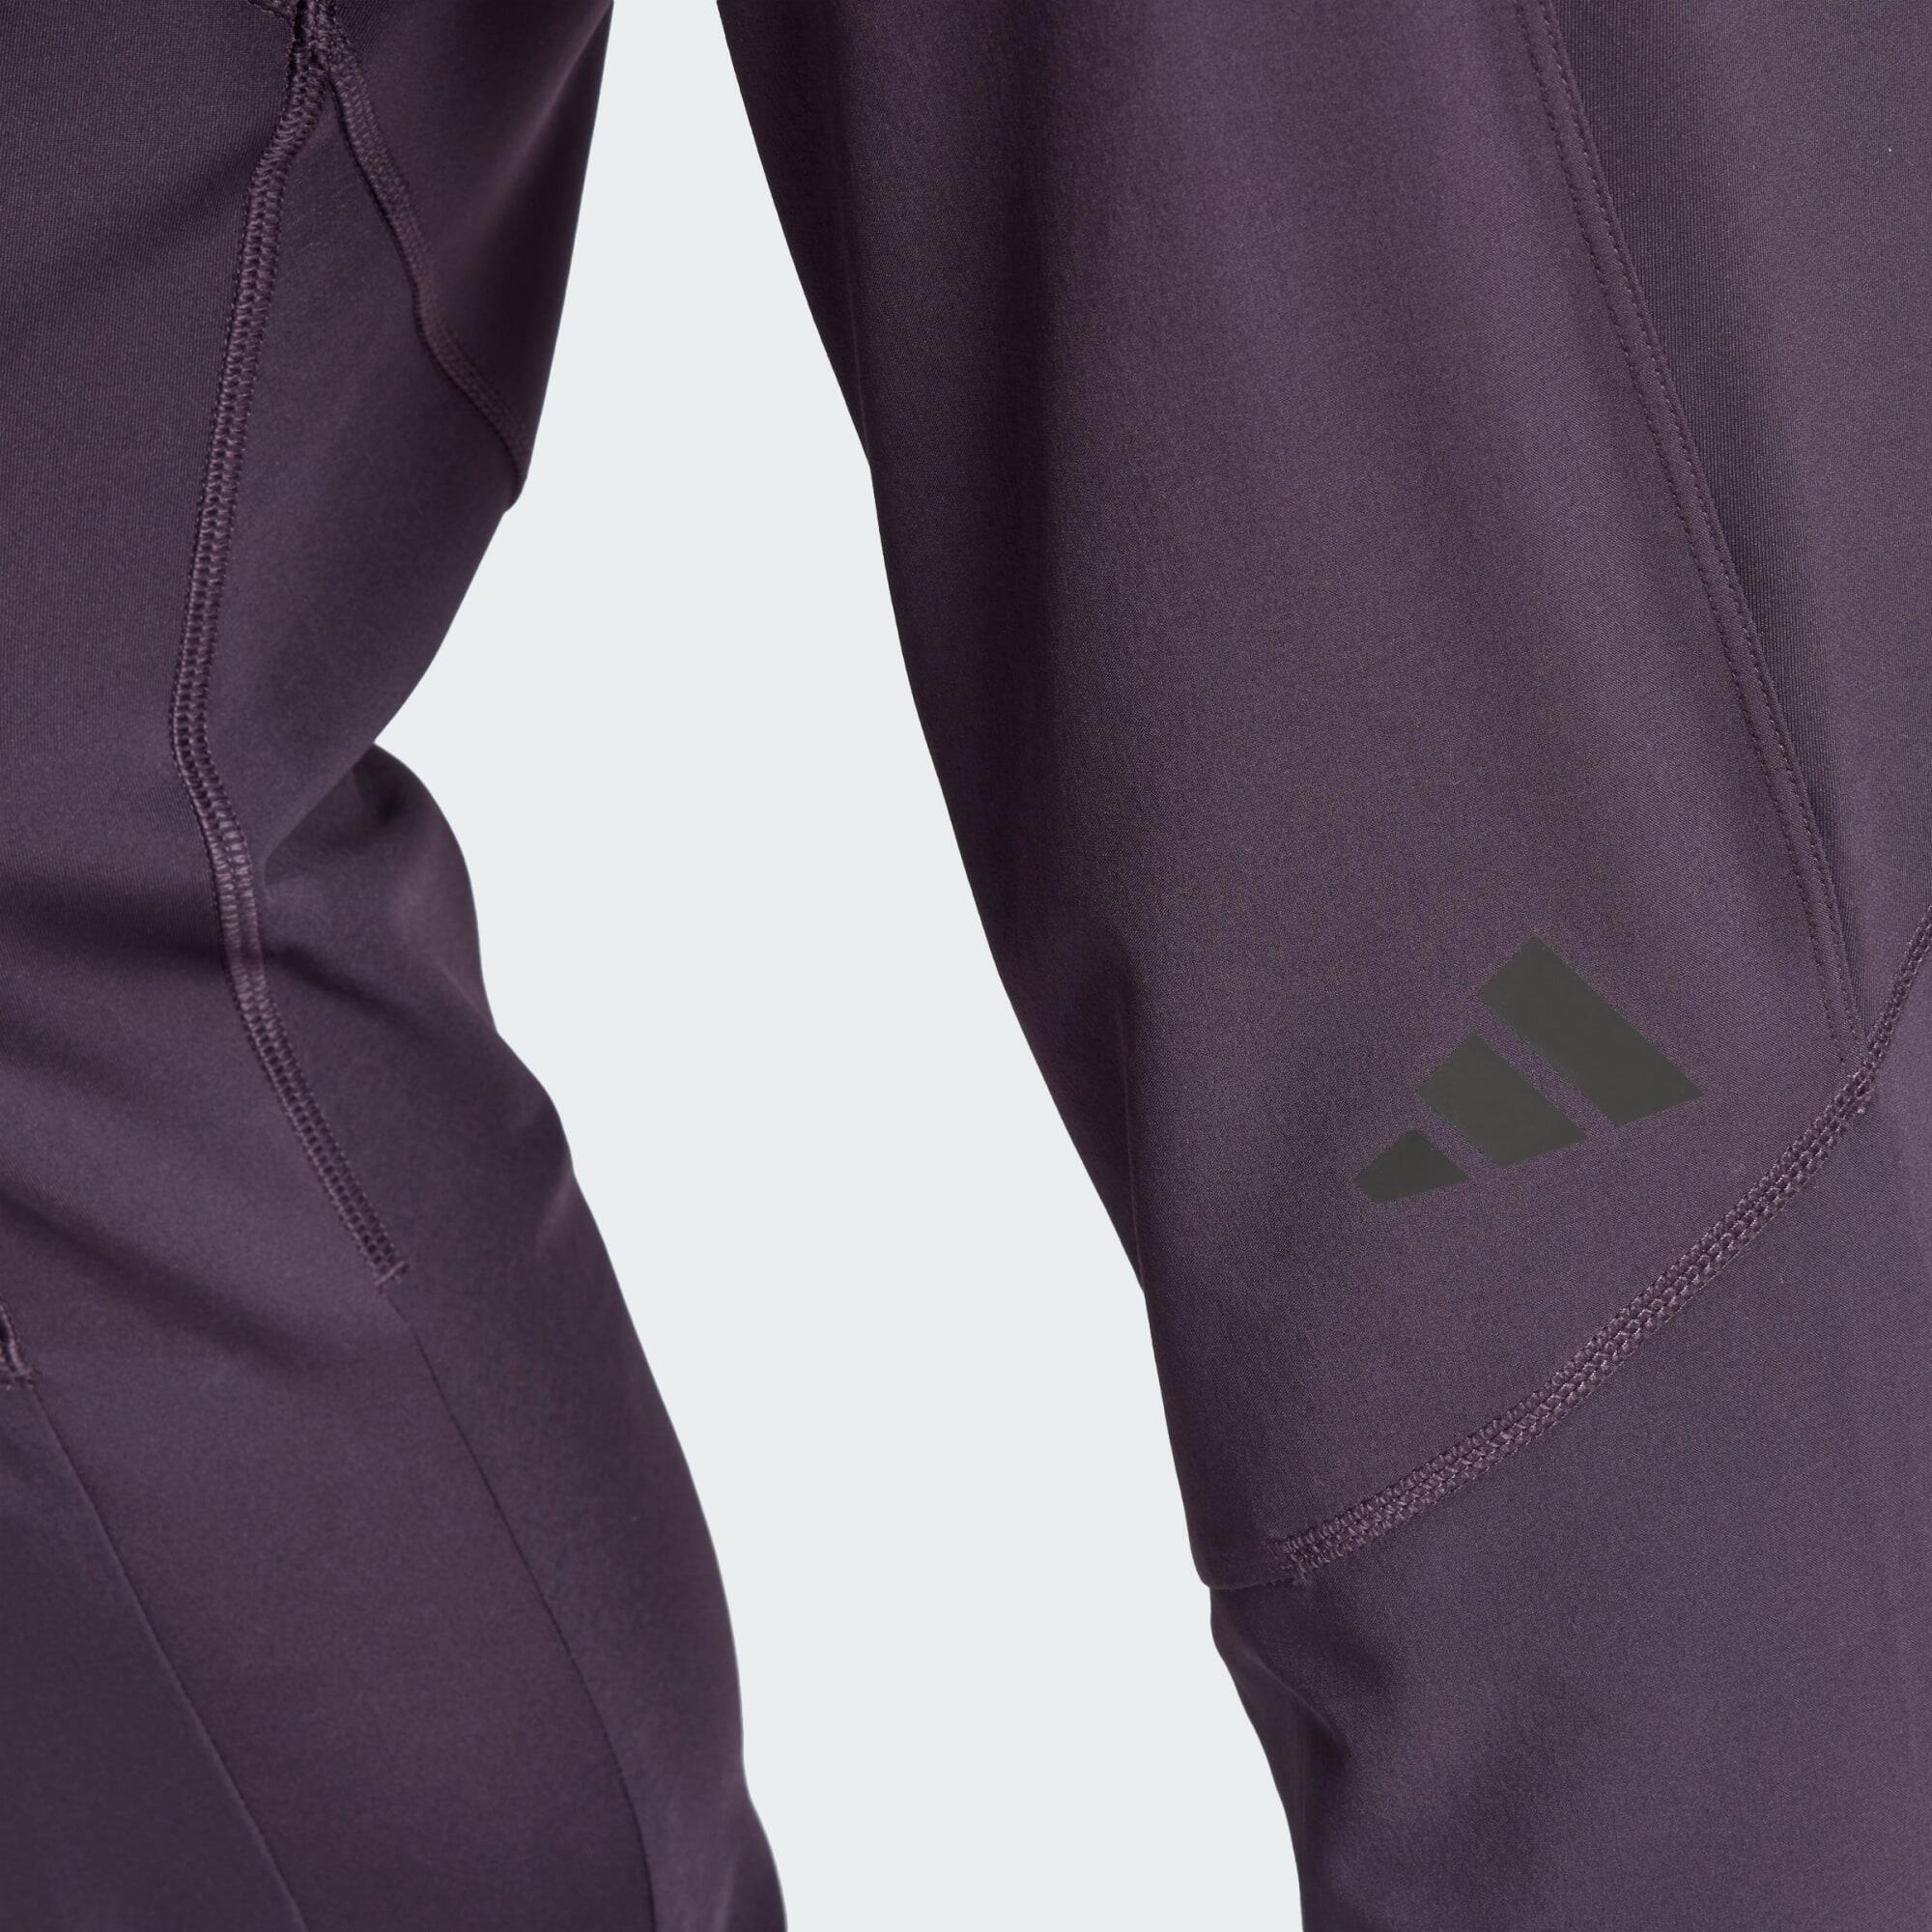 Designed for Training Workout Pants 5/5